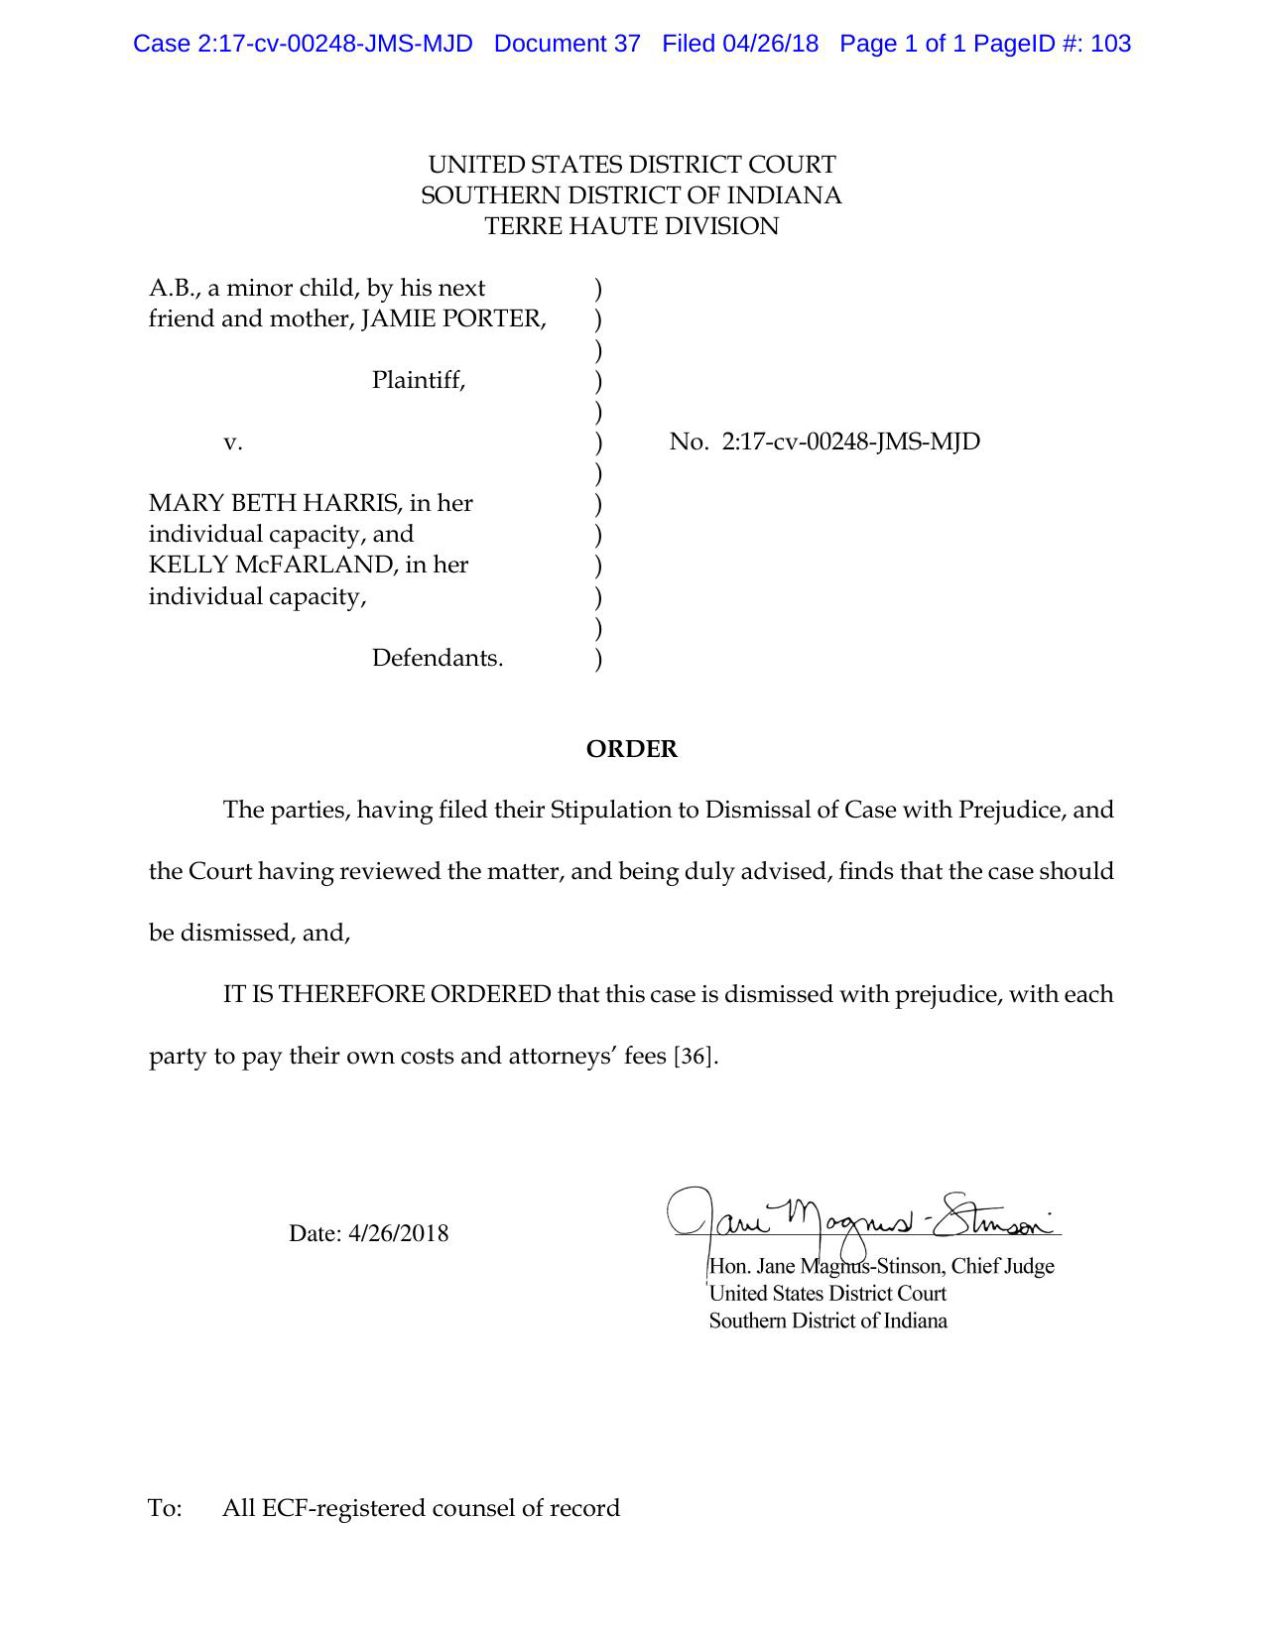 proposed order granting motion to dismiss